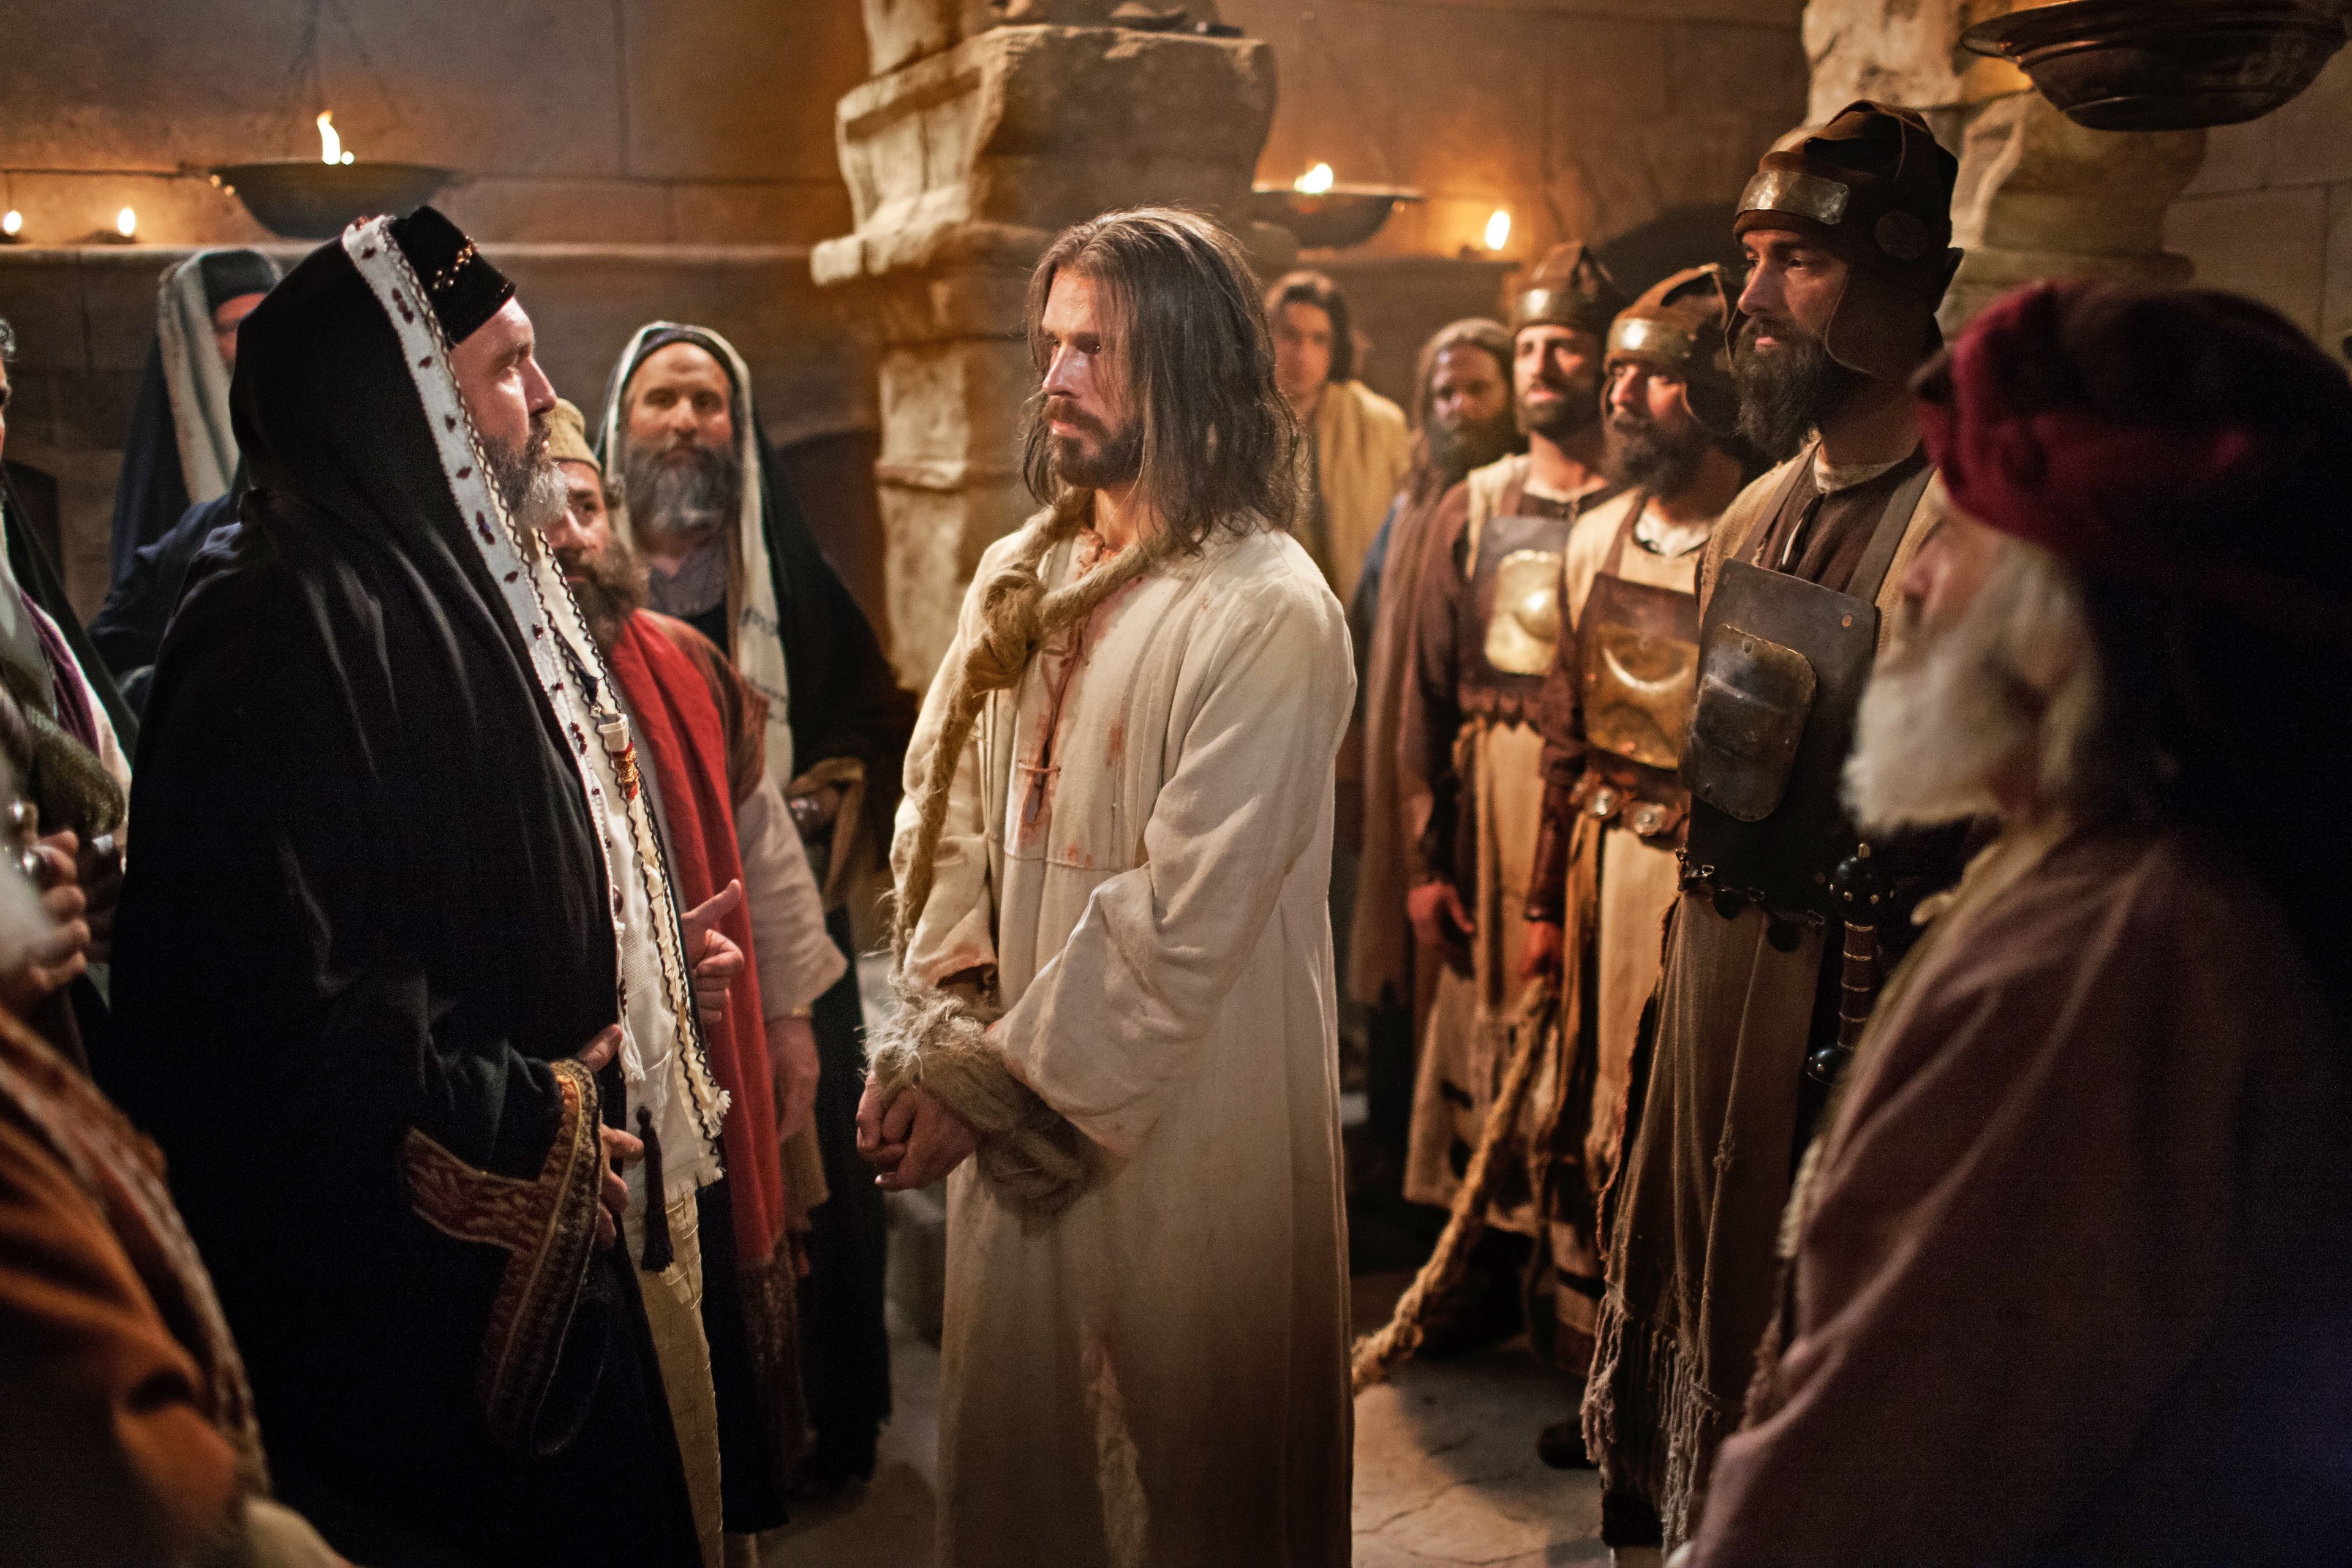 Jesus standing bound before Caiaphas and the Sanhedrin.